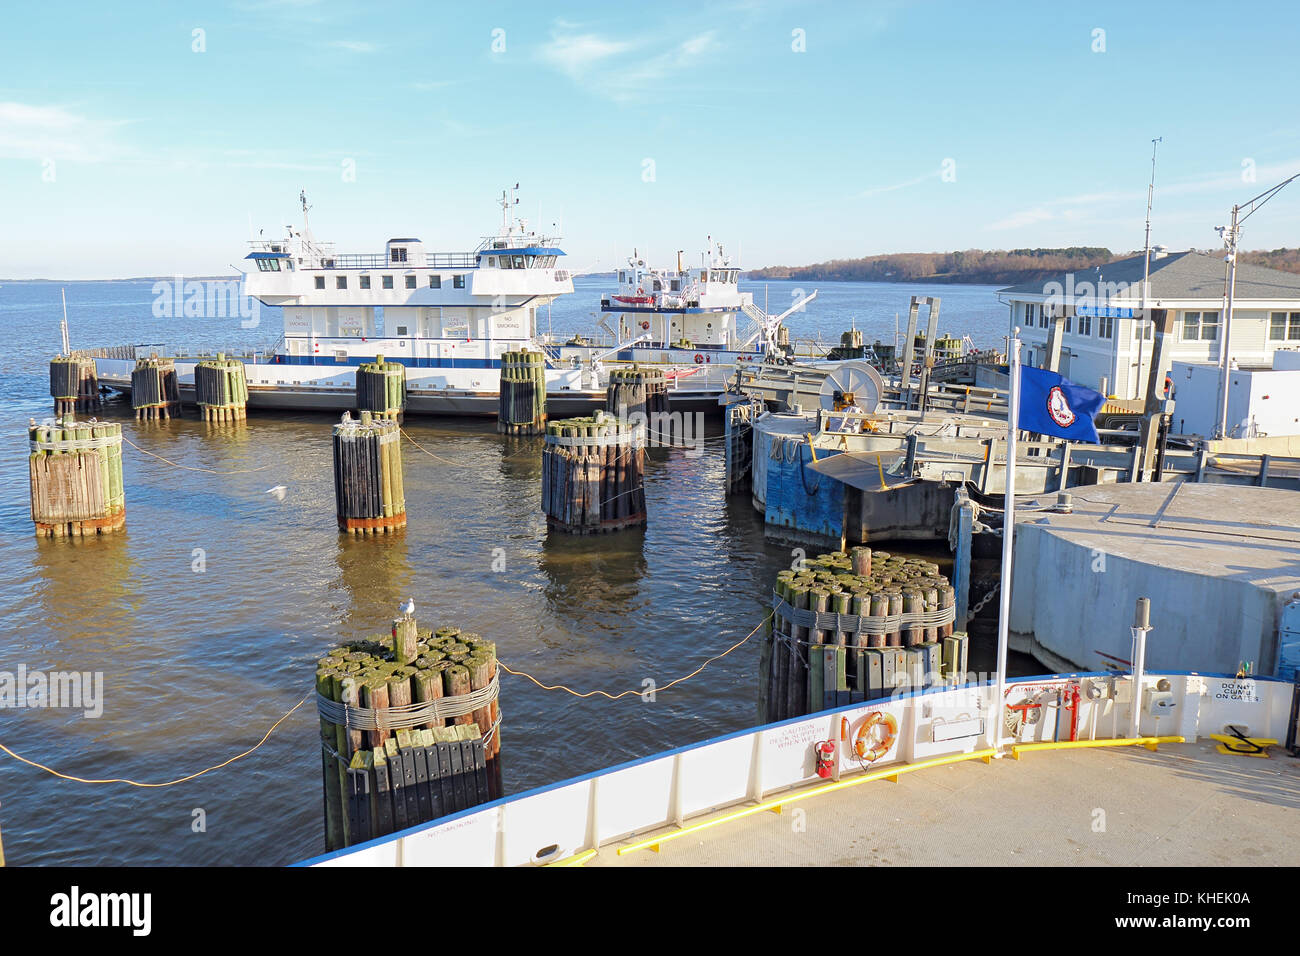 SCOTLAND, VIRGINIA - FEBRUARY 20 2017: Ferry boat docked at the Jamestown-Scotland Ferry, which runs between Jamestown Island and Surrey. This histori Stock Photo